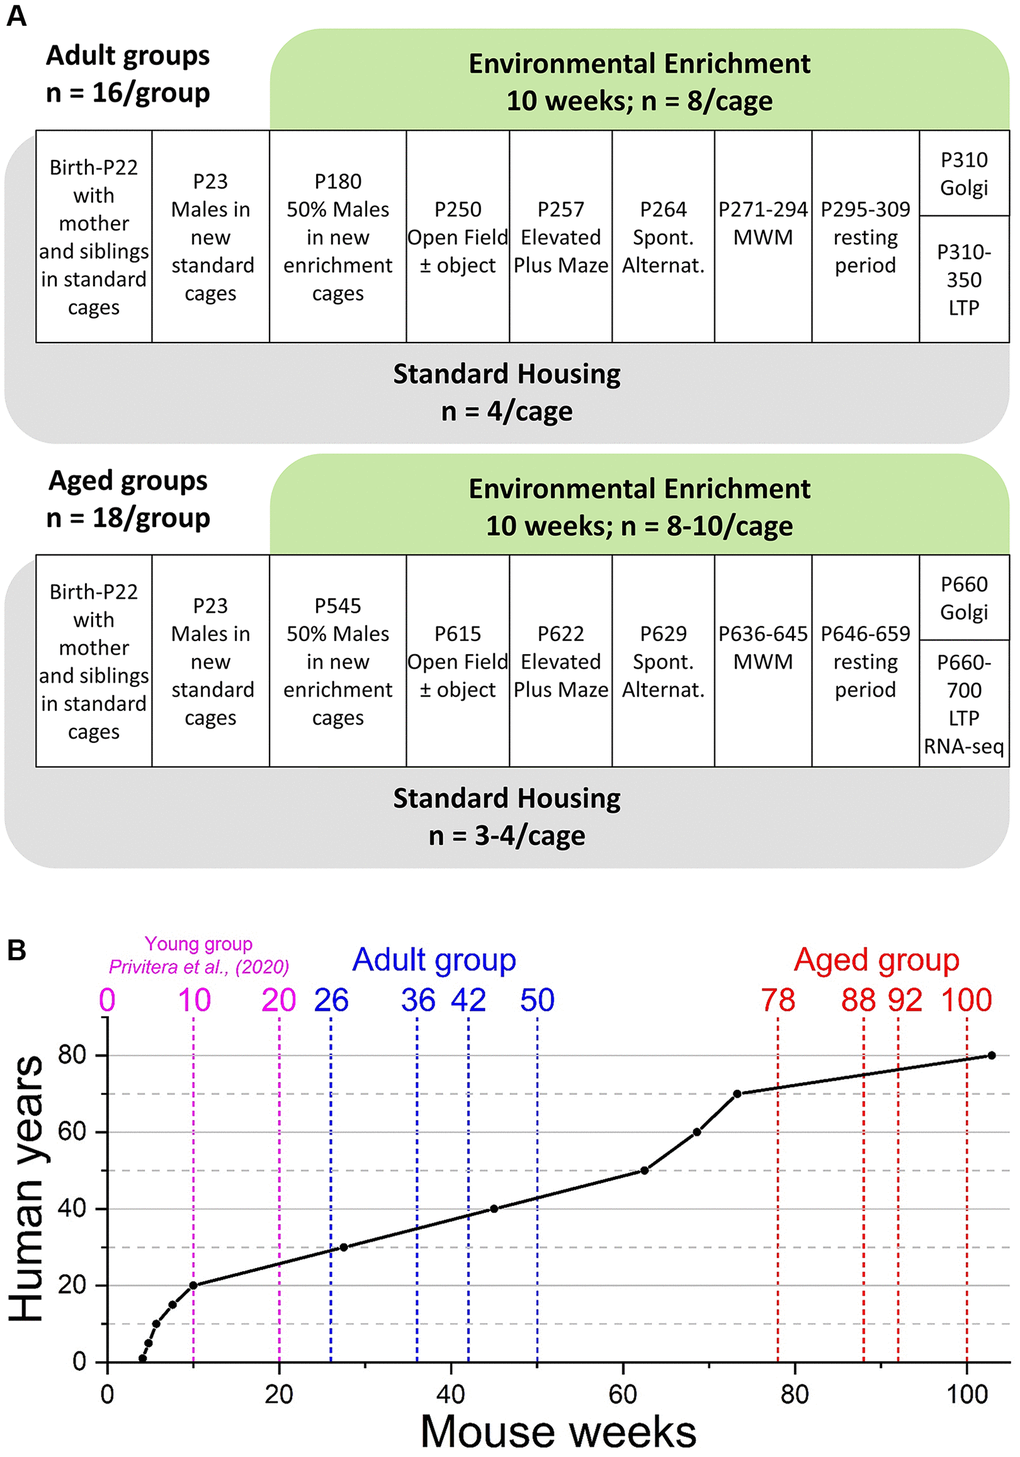 Experimental outline and age comparison. (A) Time-course of housing provision and experimental treatments for Adult mice (upper panel) and Aged mice (lower panel). Abbreviations: P: postnatal day; MWM: Morris water maze; LTP: long-term potentiation and electrophysiological analysis of synaptic transmission. (B) Comparison of mouse and human ages based on data from Wang et al., (2020) [71]. The broken vertical lines represent the weeks at which two separate cohorts of mice (blue; Adult and red; Aged): went into enrichment (weeks 26 and 78); behavioural testing started (weeks 36 and 88), behavioural testing ended (weeks 42 and 92), and the end of ex vivo analyses (weeks 50 and 100). For comparison, the previously reported young group (cyan) were born into standard housing or enrichment (week 0), began behavioural testing at week 10, with all testing completed by week 20 [36].